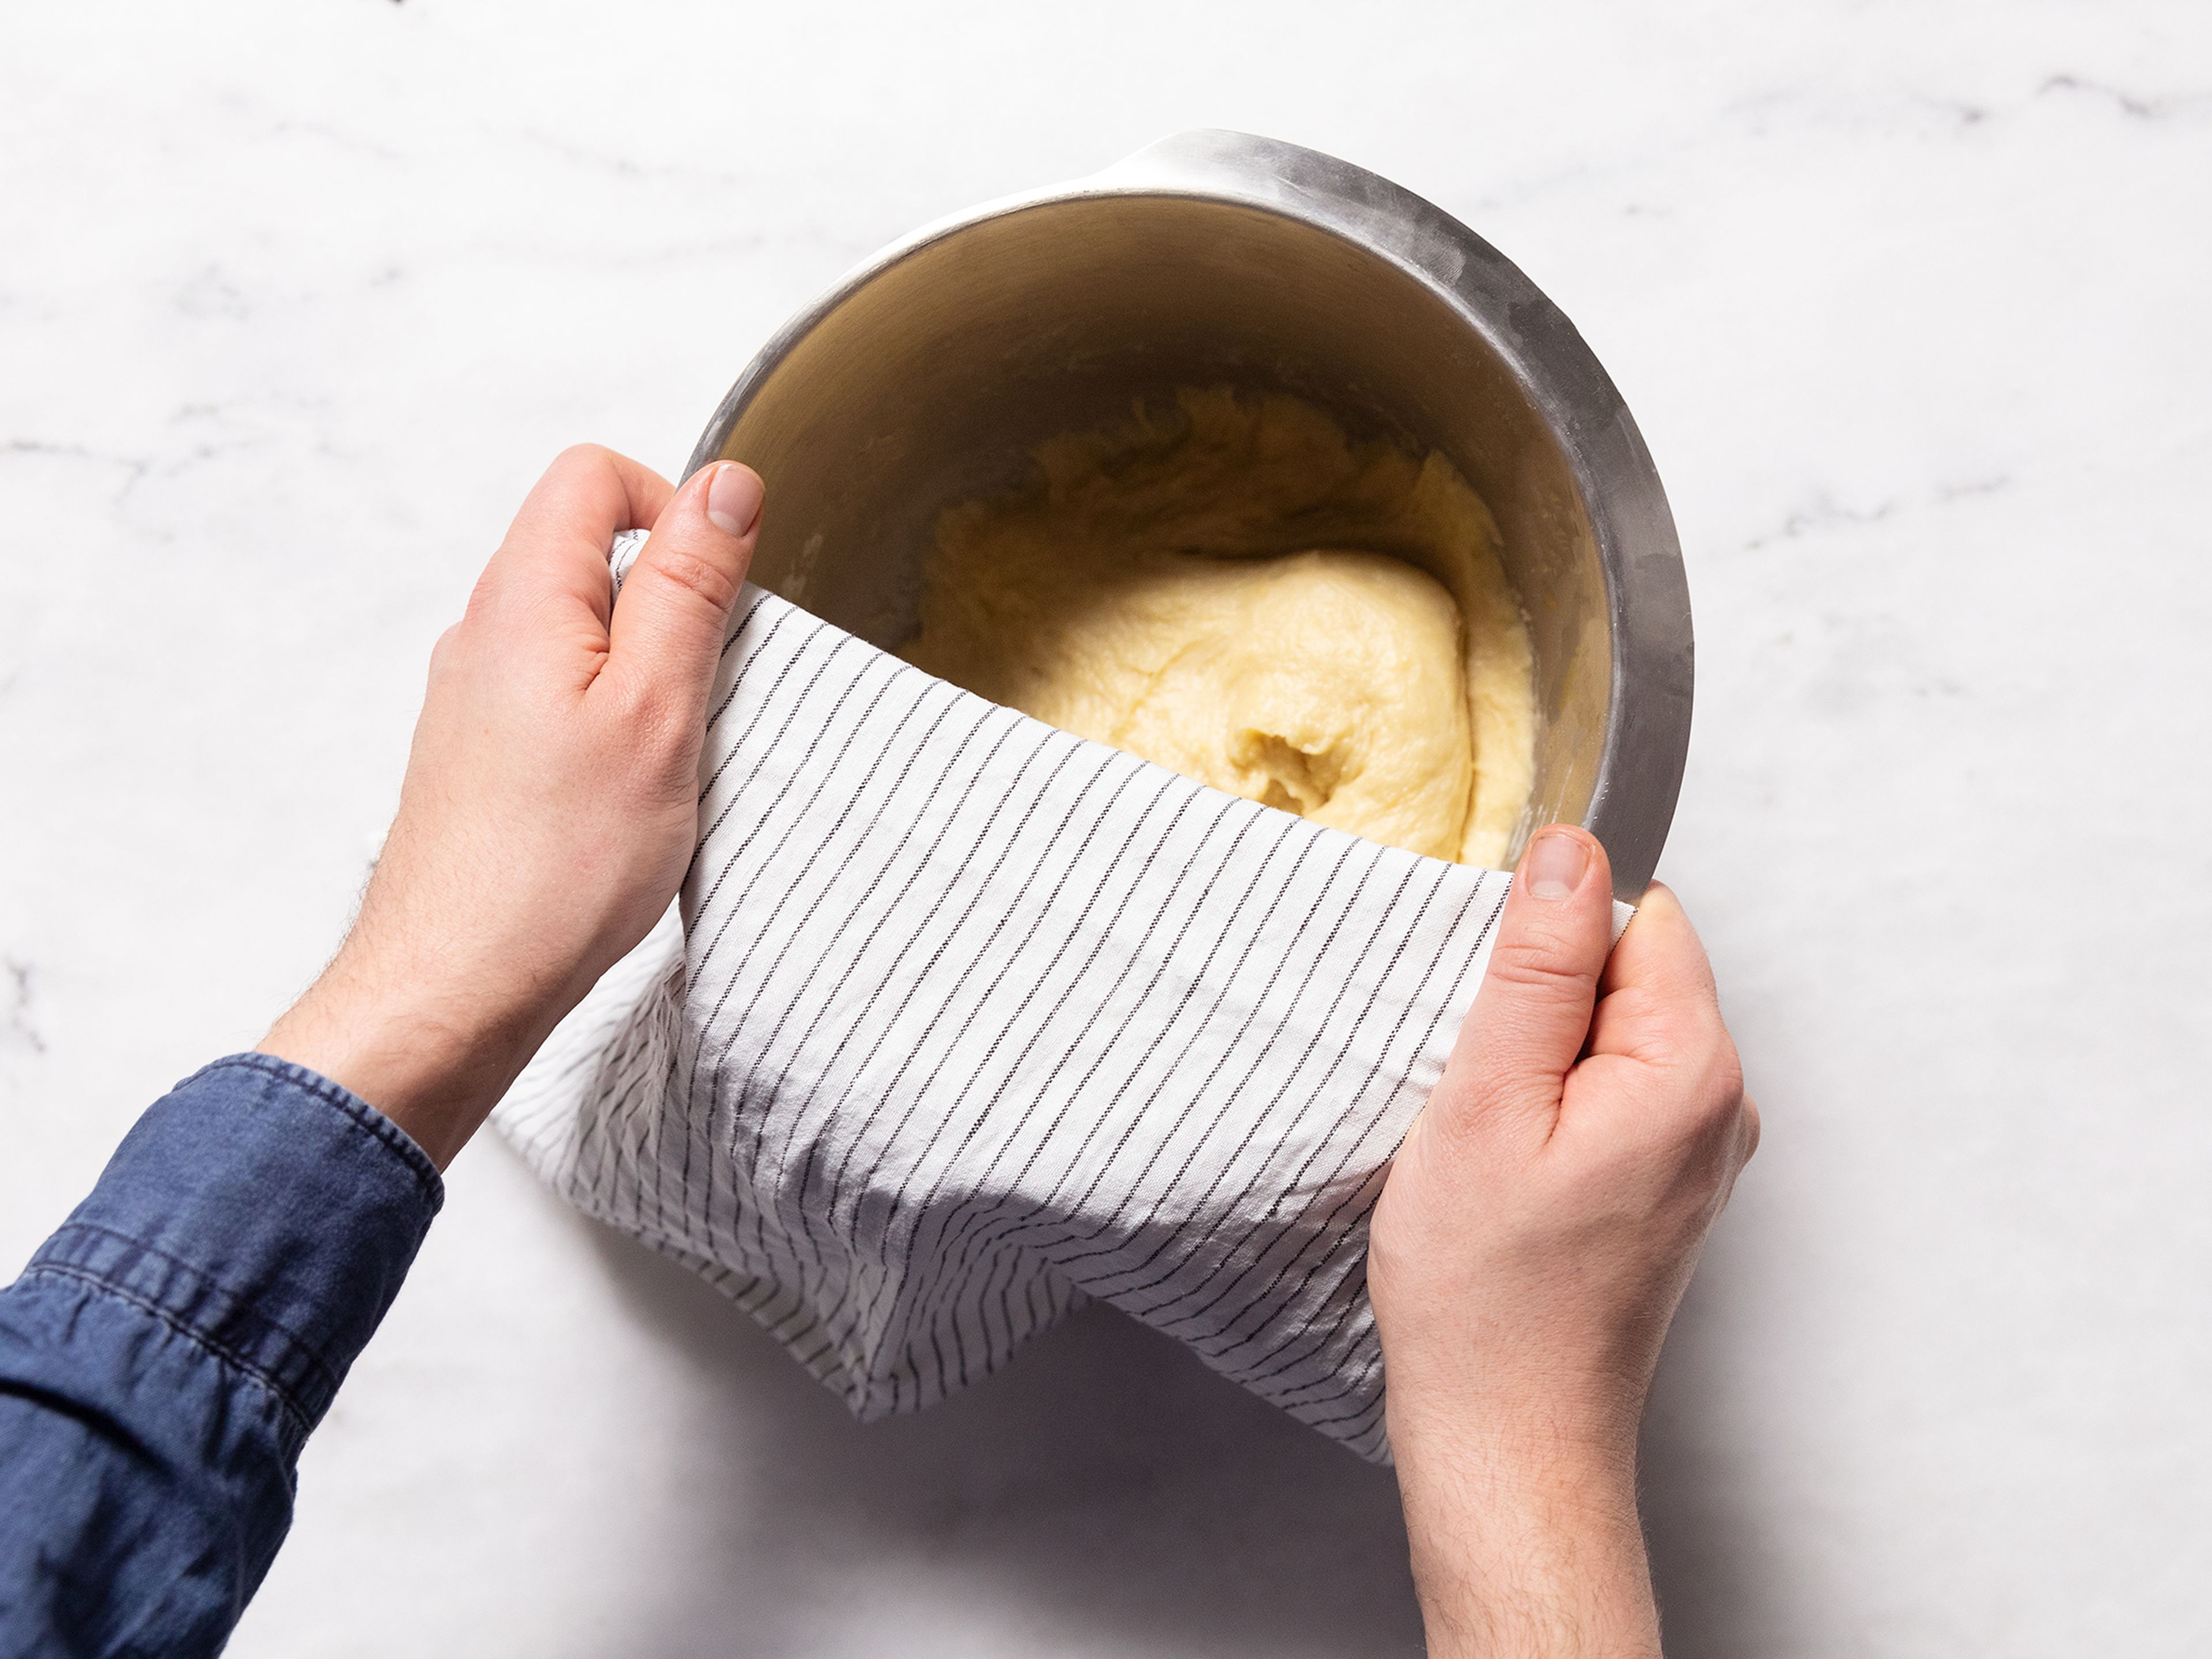 Knead until the dough feels stretchy, cover with kitchen towel and let rise approx. 90 min. in a warm place.